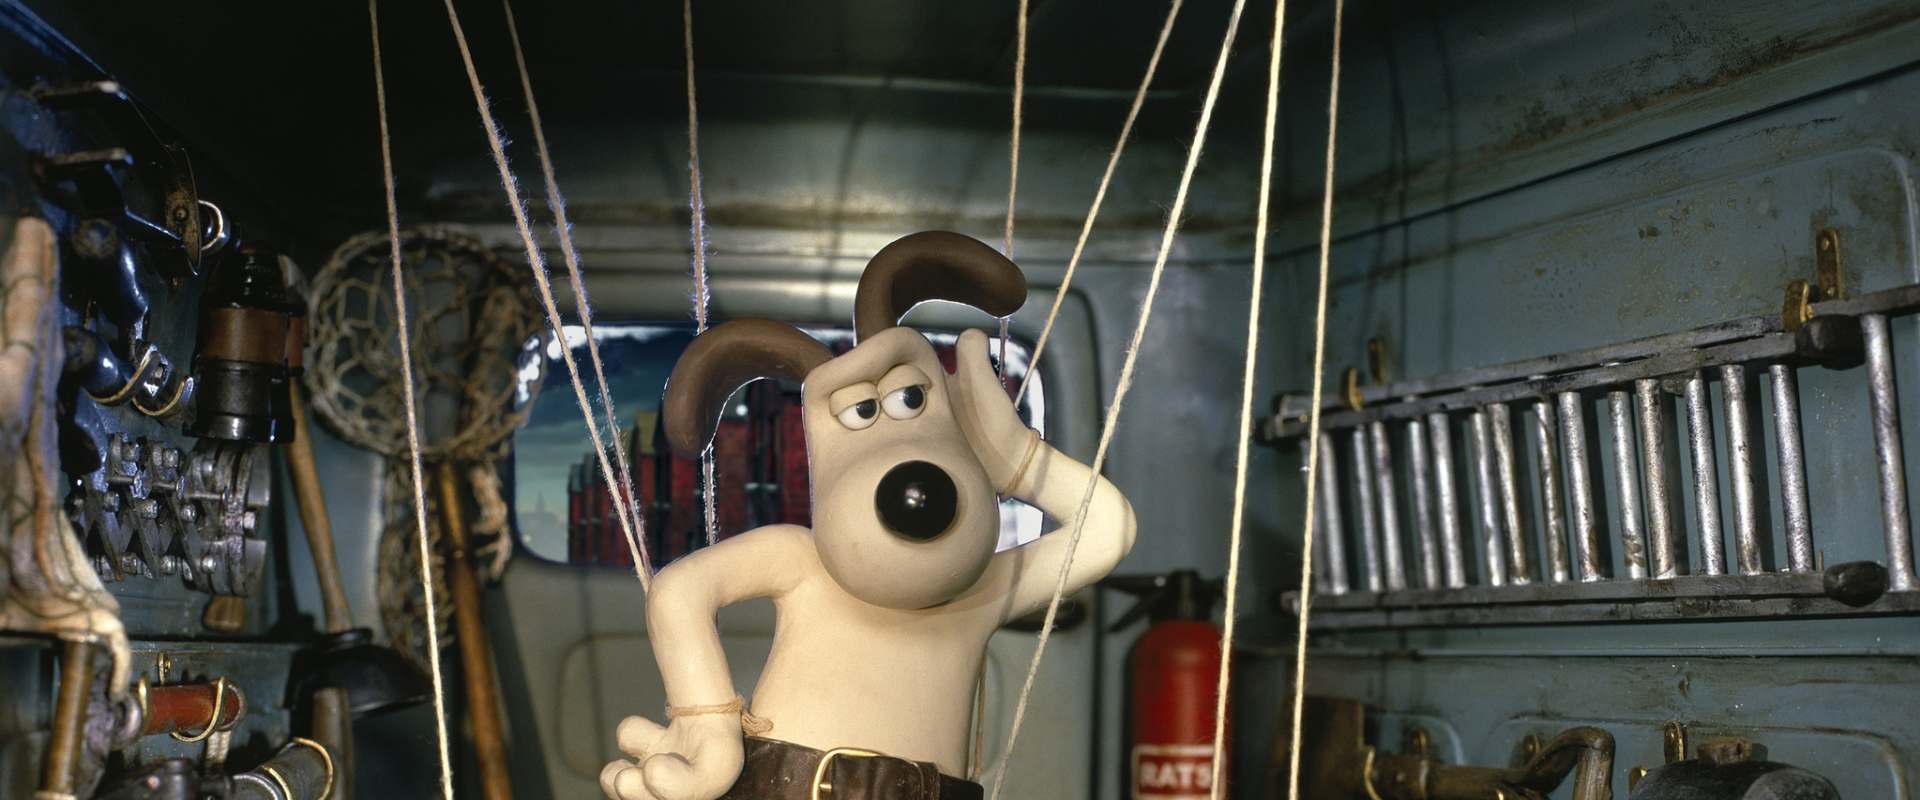 Wallace & Gromit: The Curse of the Were-Rabbit background 2